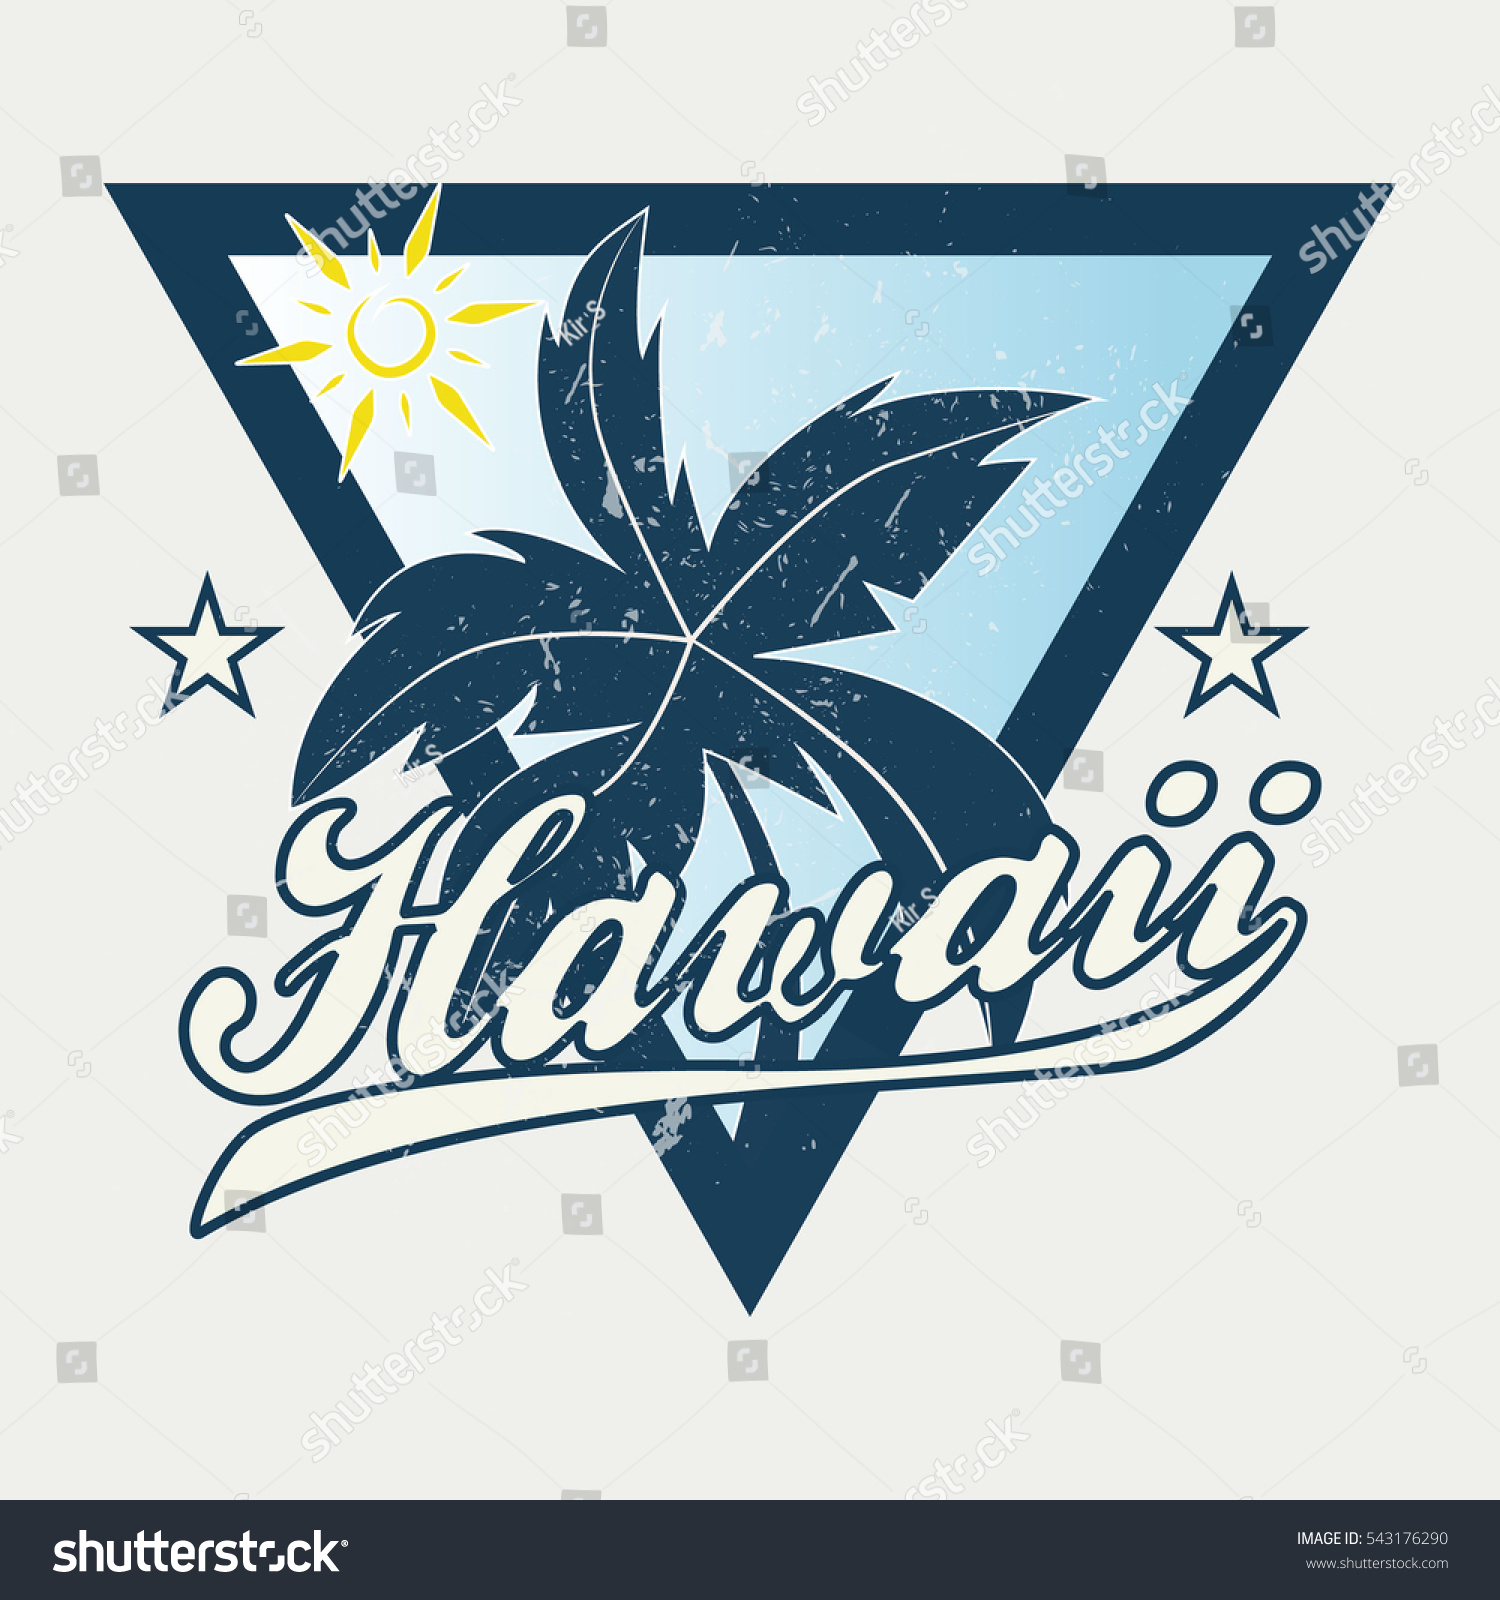 Hawaii Vector Illustration Vintage Graphic Style Stock Vector 543176290 ...